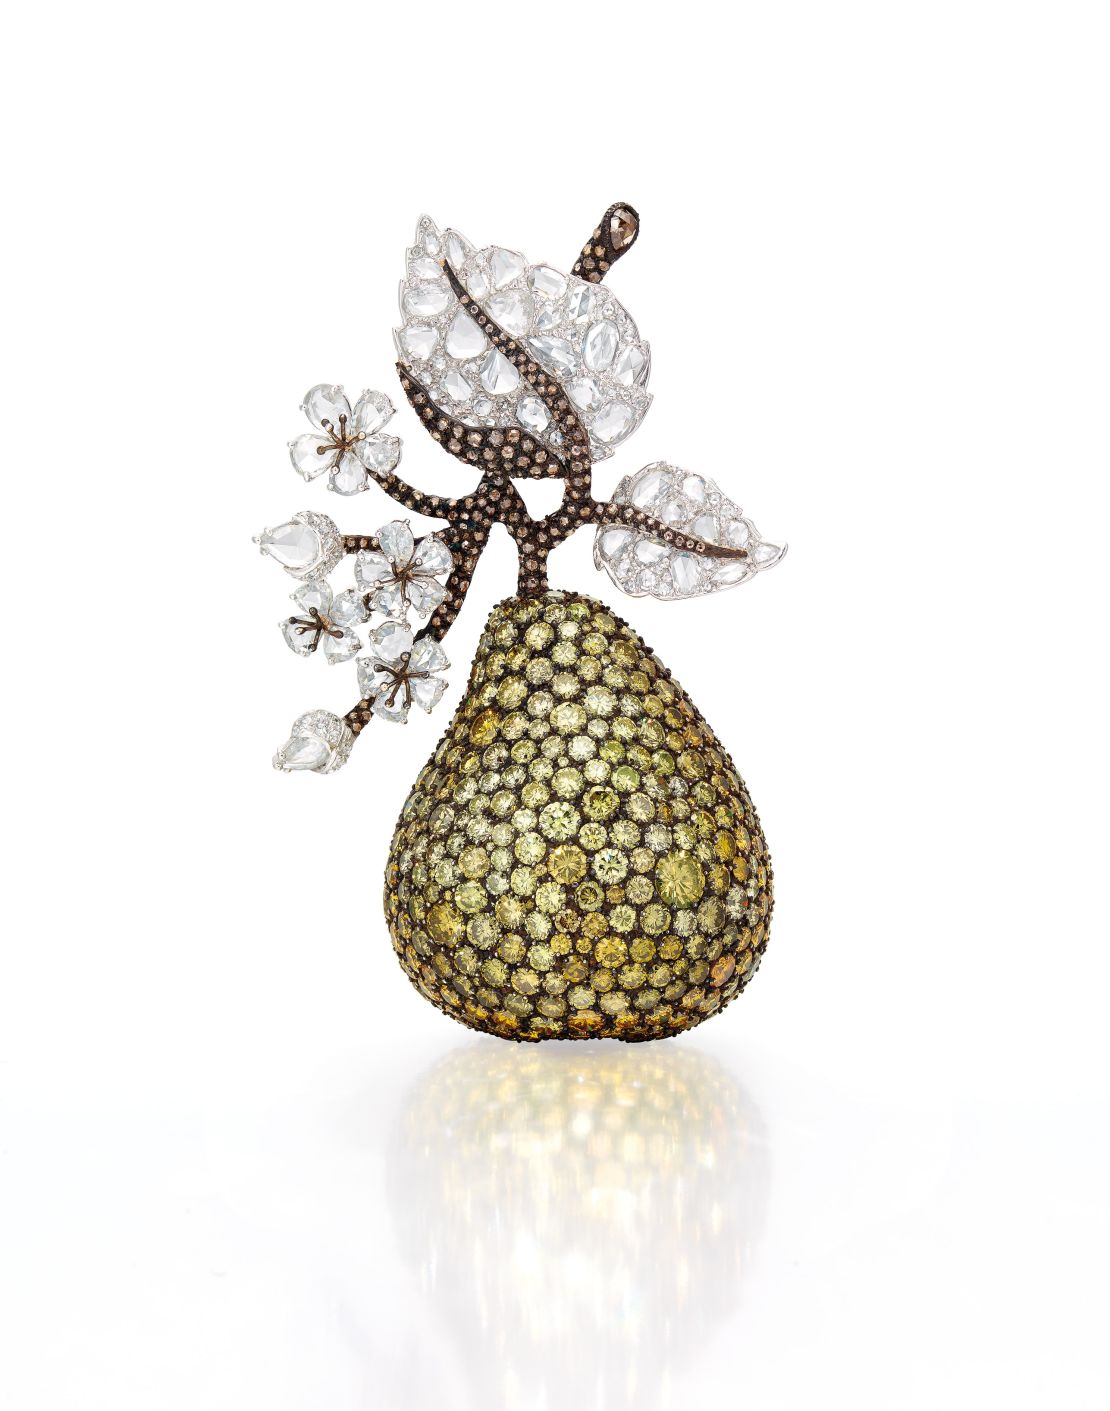 Pear brooch by Michelle Ong